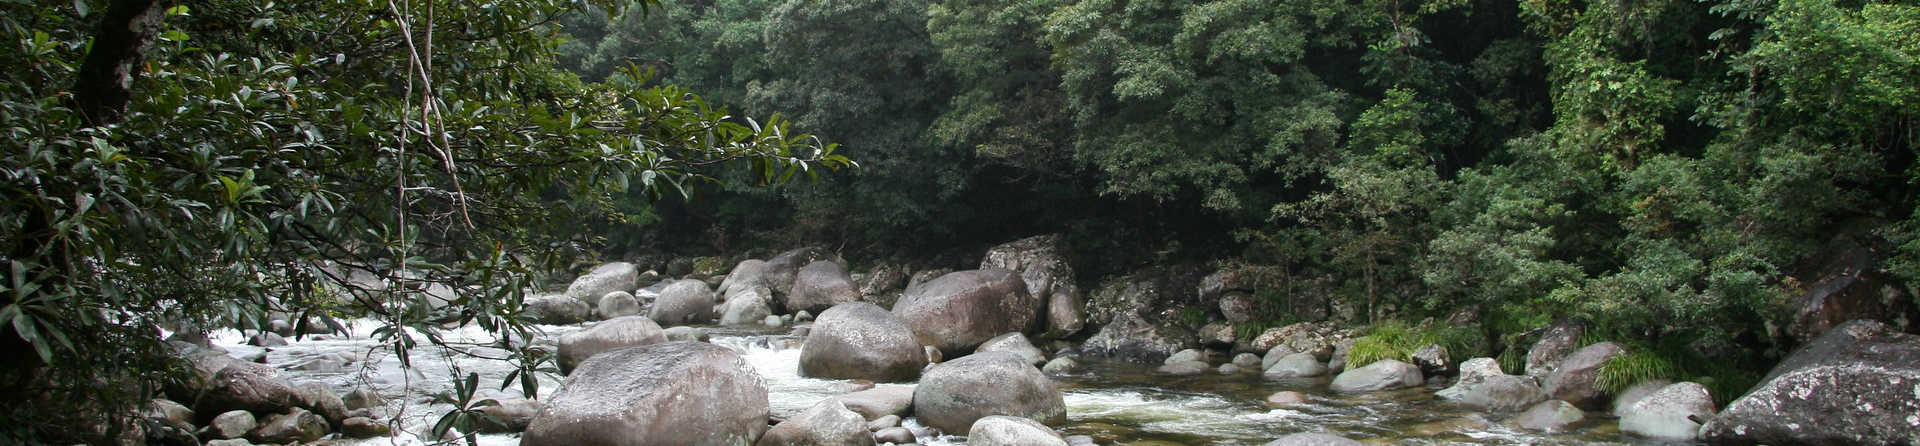 What is special about the Daintree Rainforest?